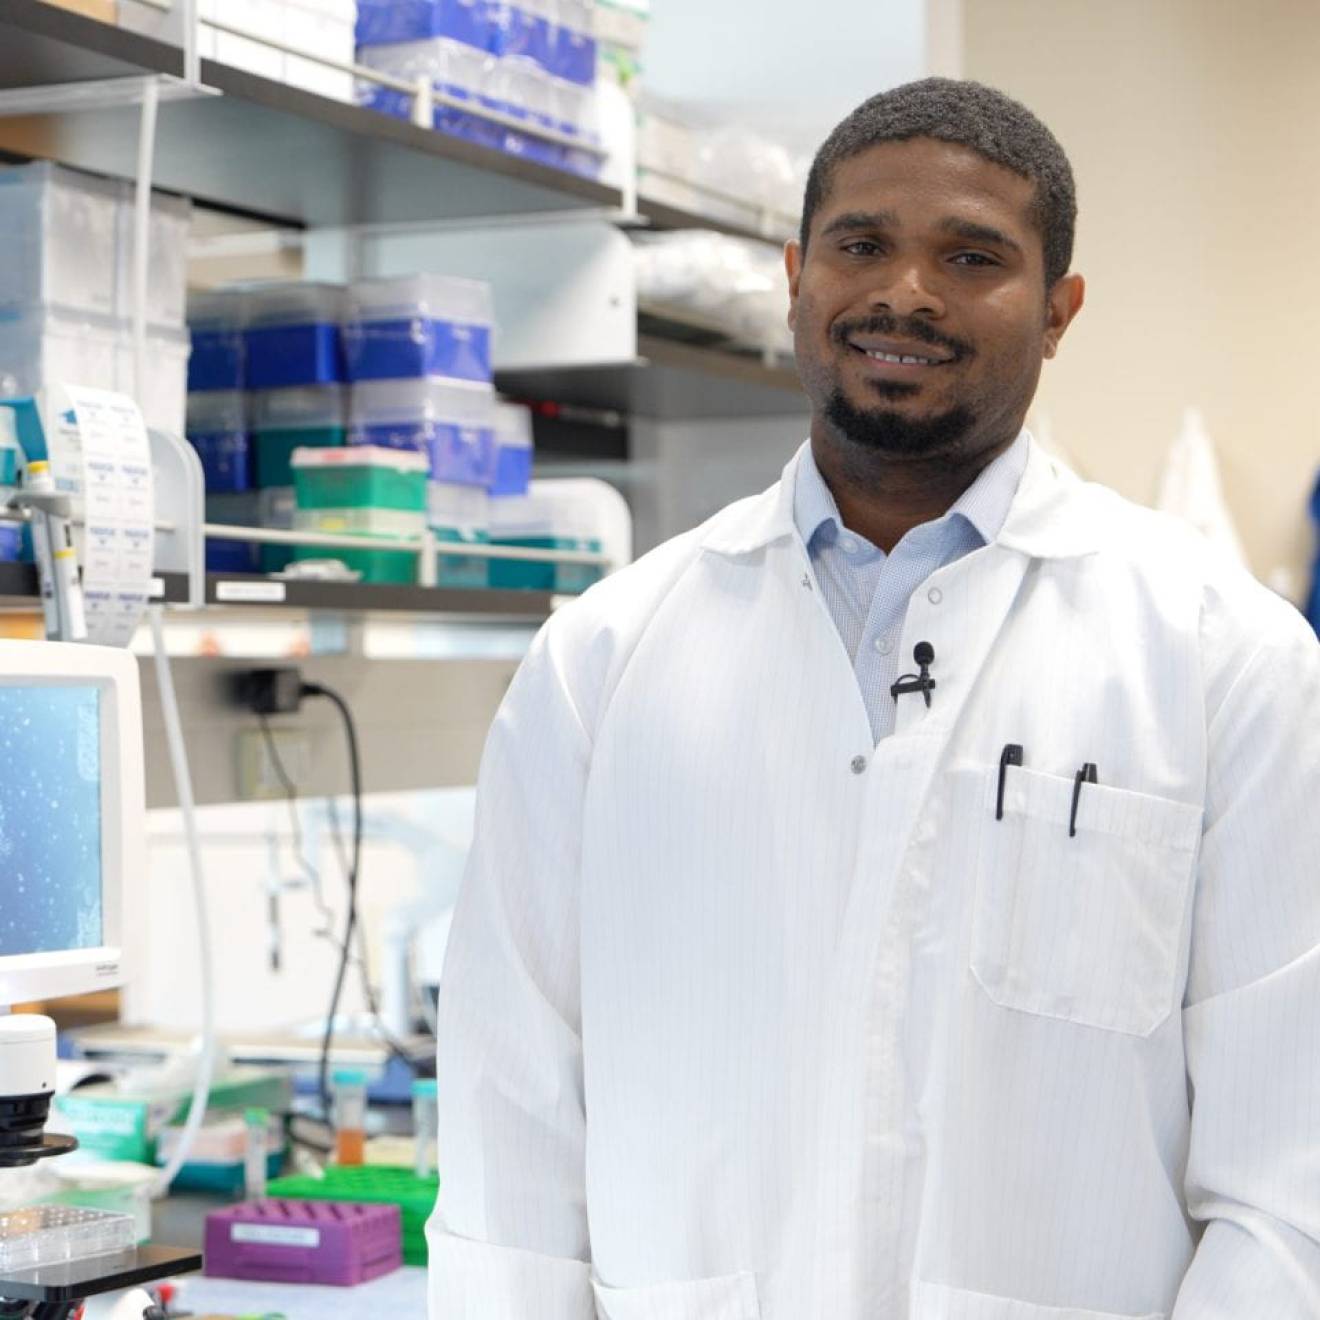 Young Black man with a goatee in a lab coat in a lab, smiling